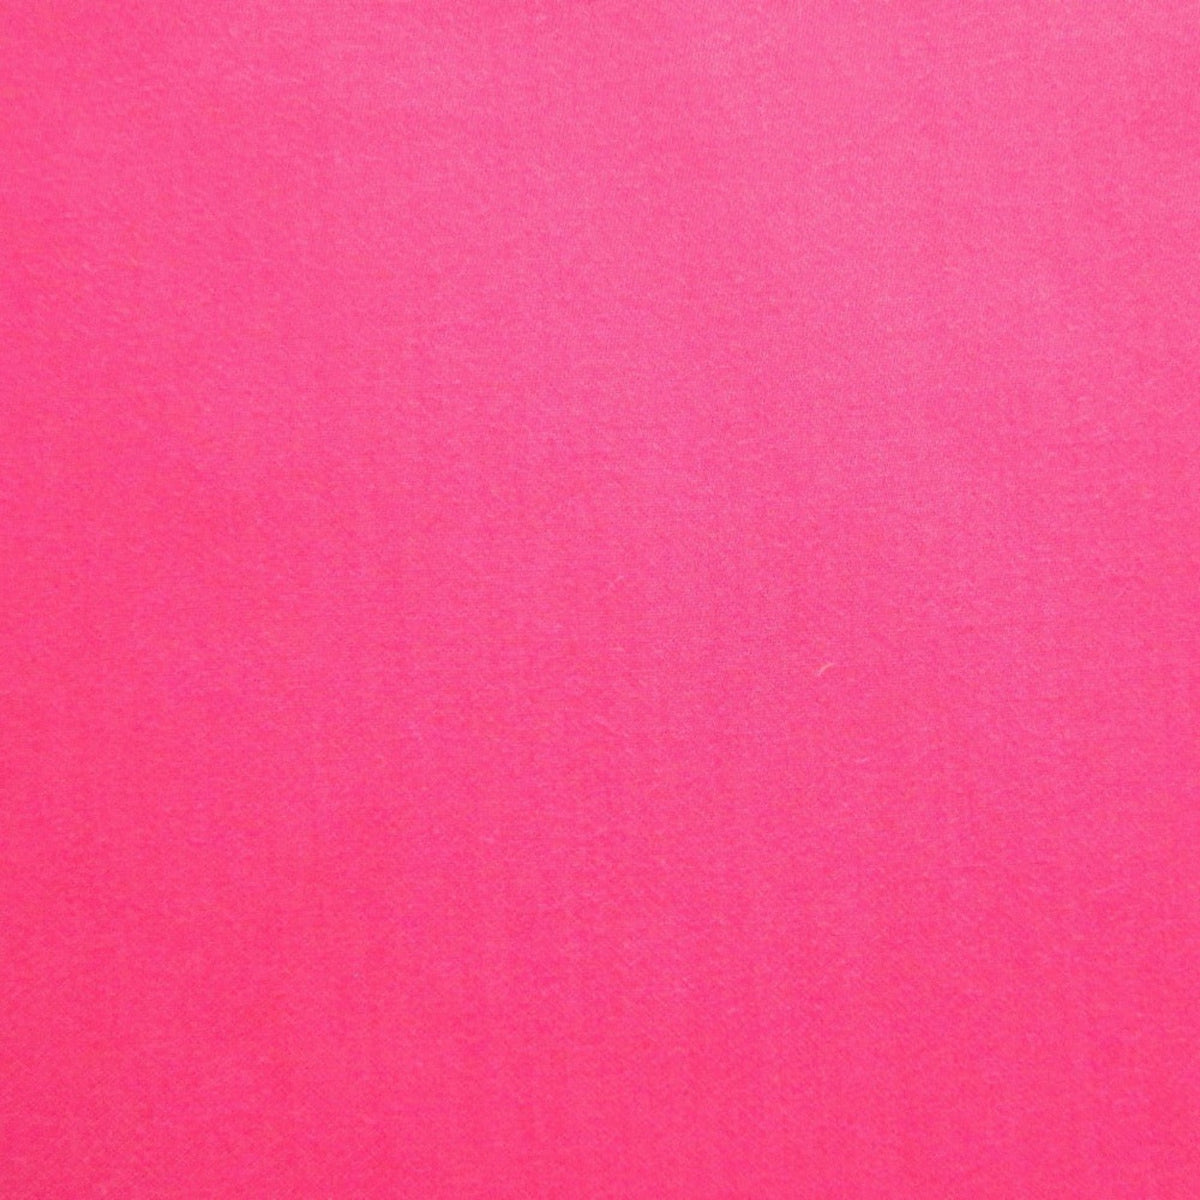 Home Treasures Royal Sateen Bedding Swatch Bright Pink Fine Linens